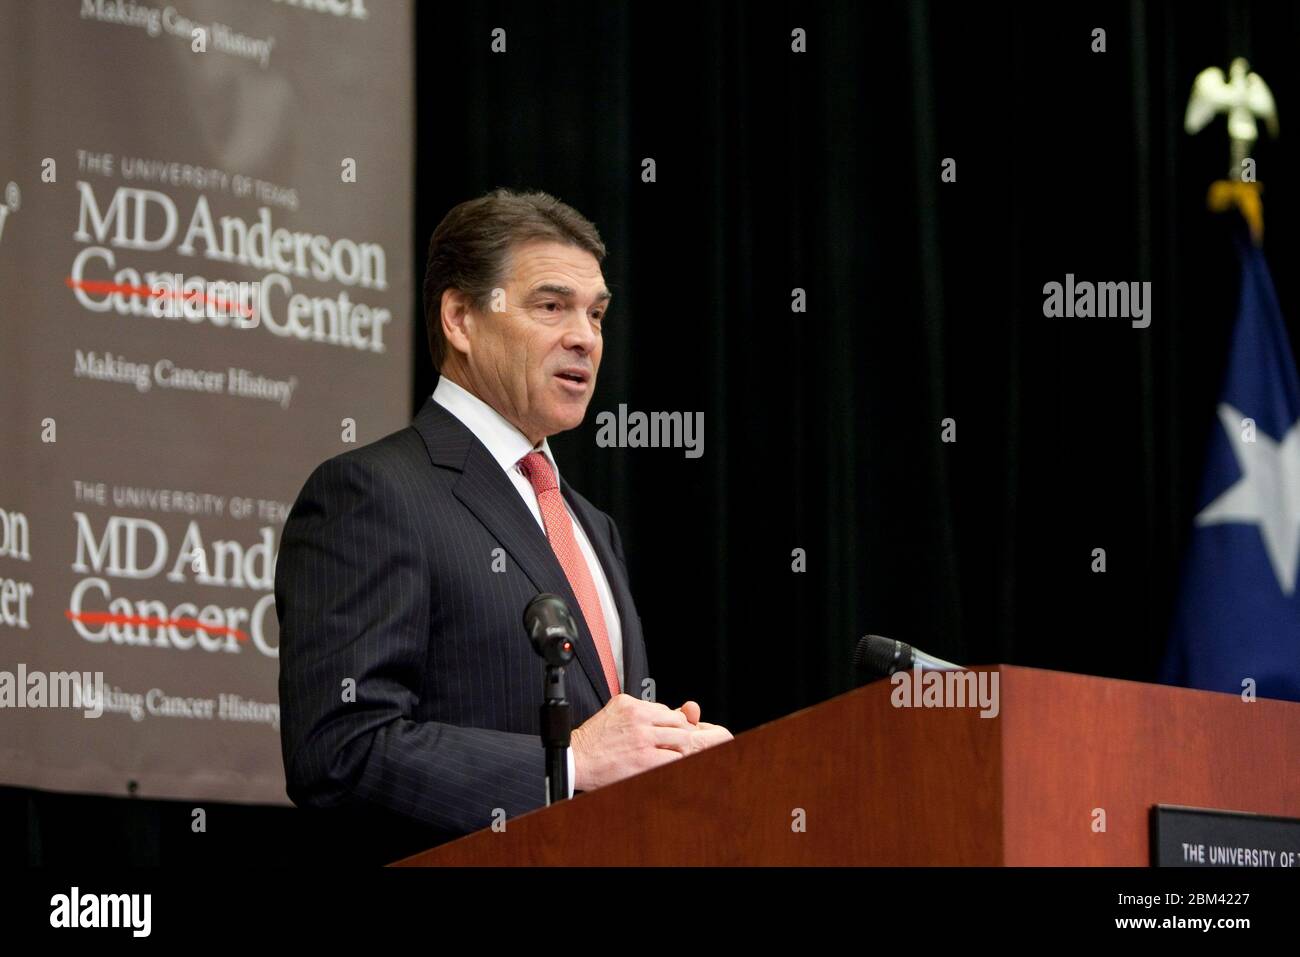 Houston Texas USA, November 28, 2011: Texas Gov. Rick Perry at announcement of new Institute for Applied Cancer Science at The University of Texas MD Anderson Cancer Center. © Marjorie Kamys Cotera/Daemmrich Photography Stock Photo